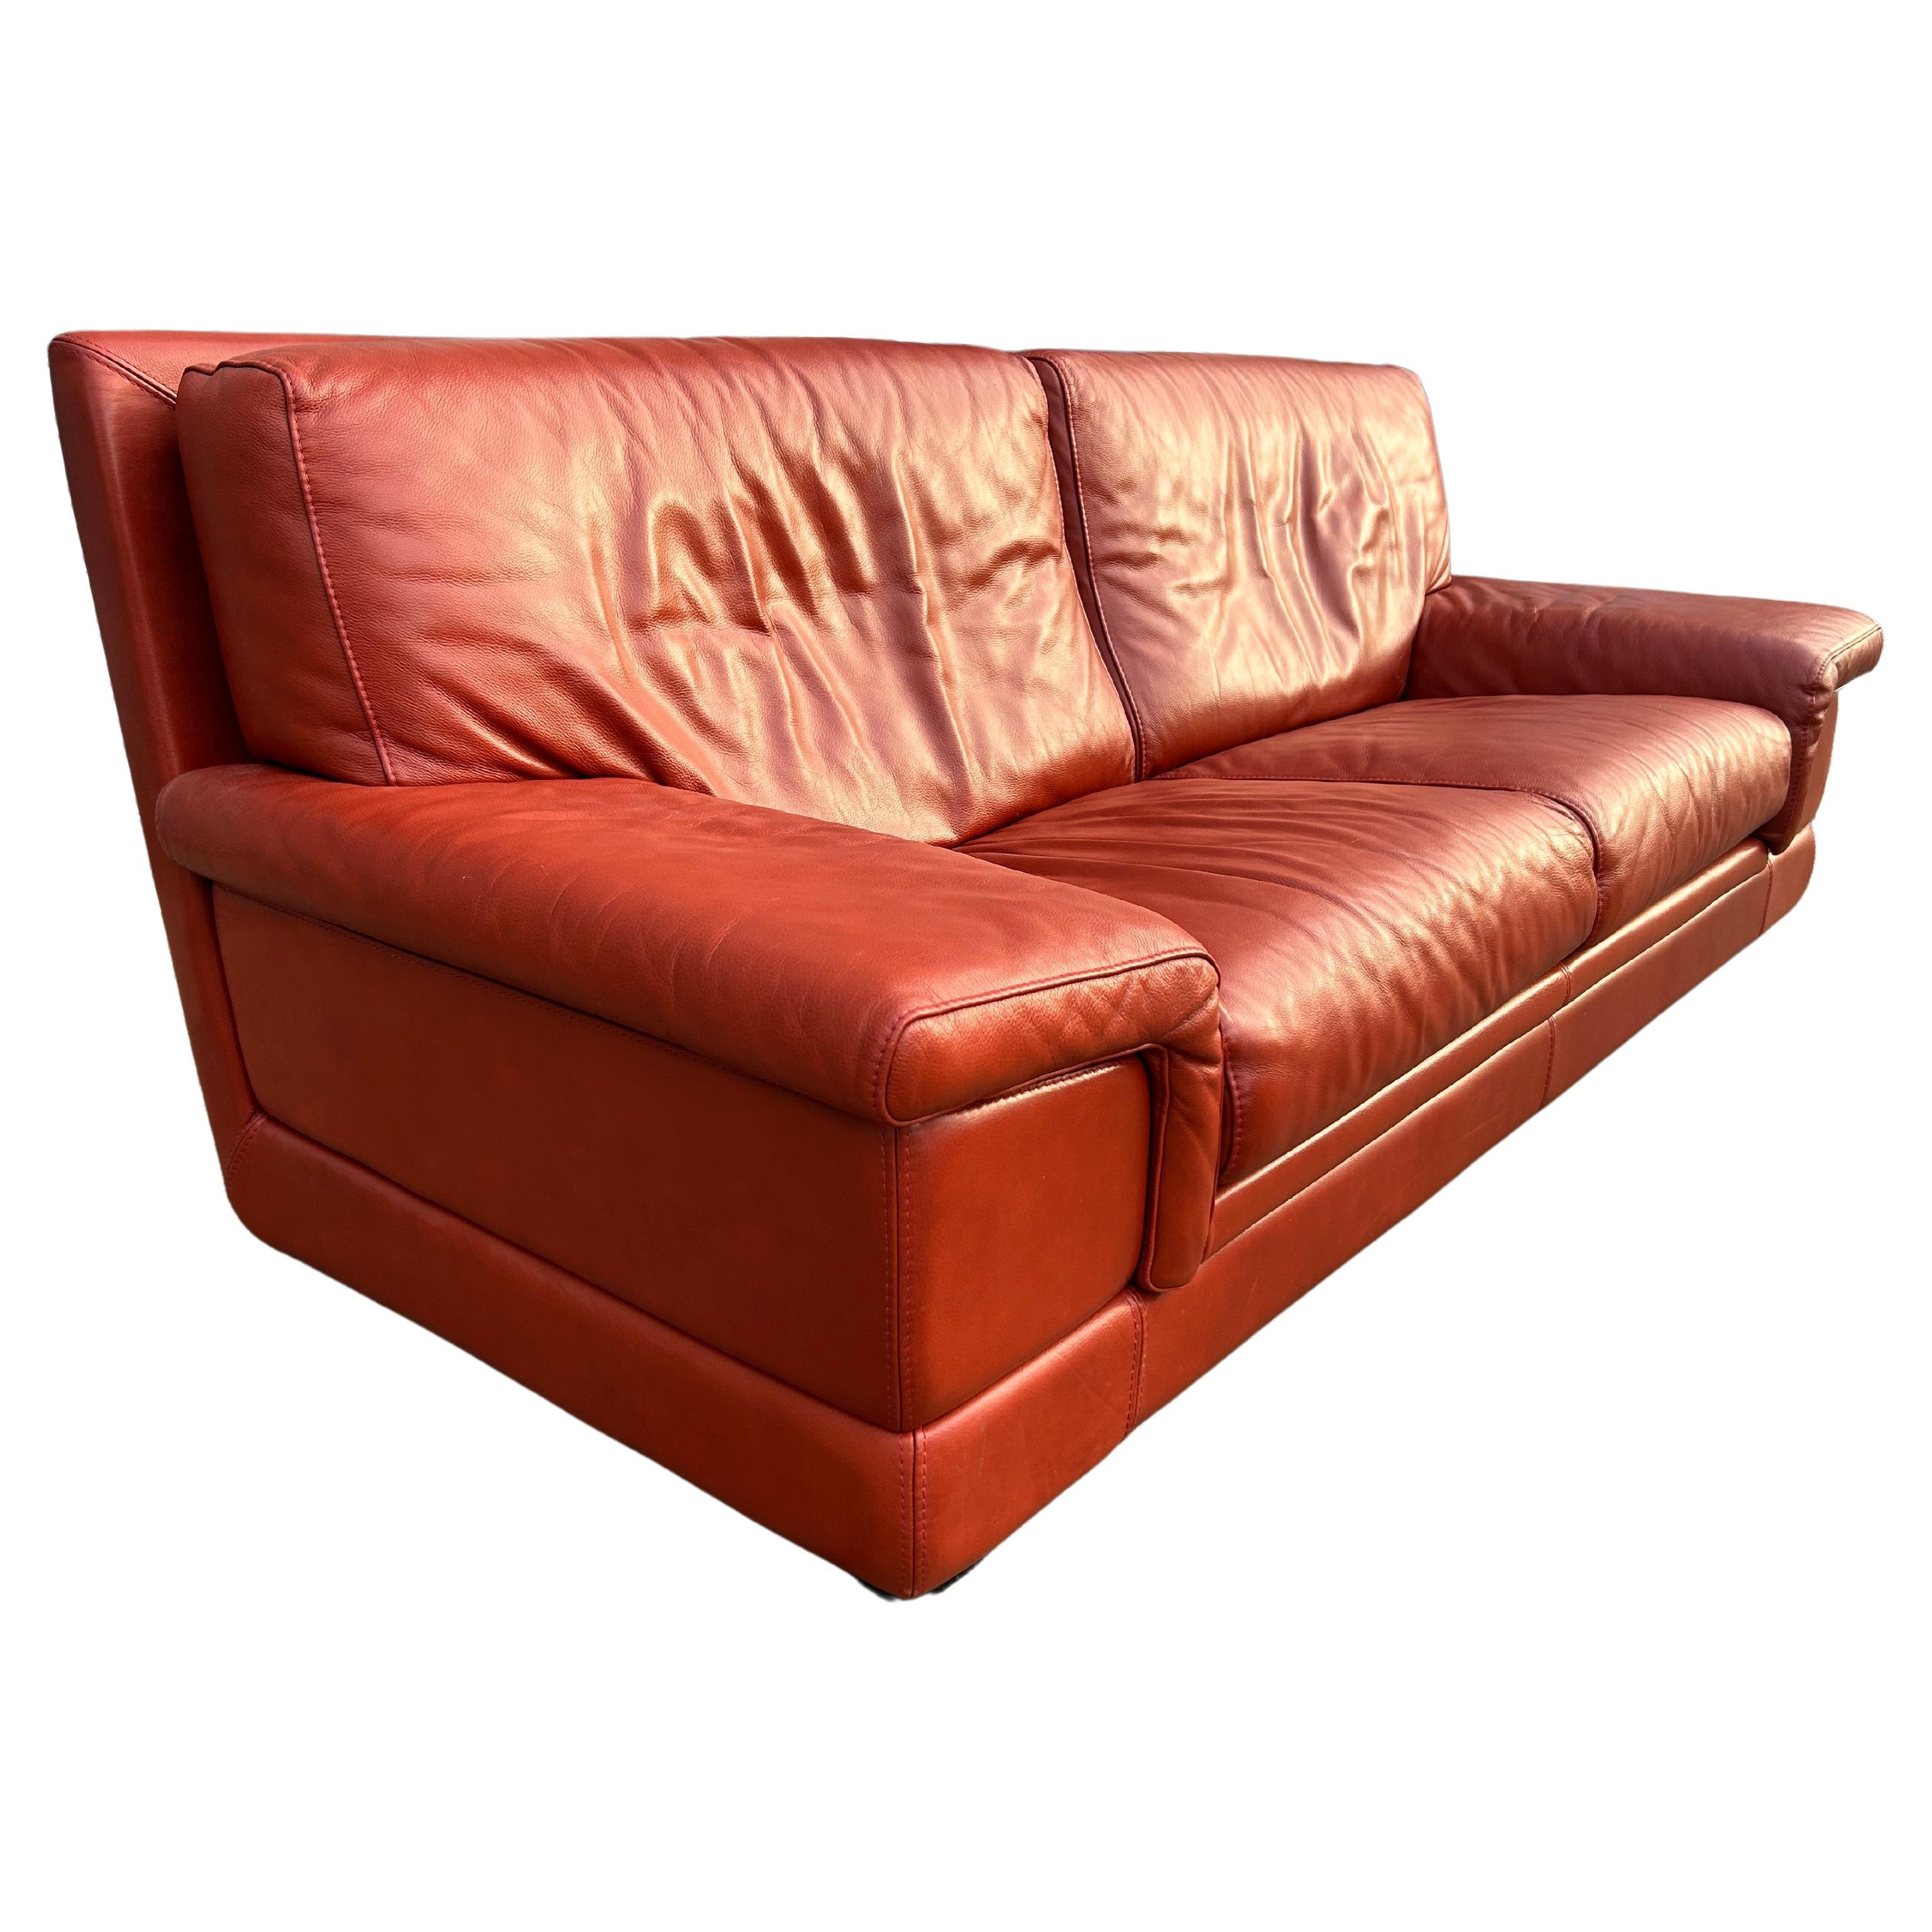 Beautiful Mid Century Italian Burnt Sienna Red Leather 3 seat Sofa by Roche Bobois. Wonderful condition very clean - ready for use. Clean soft thick leather. Great Design - Labeled under cushions and Dust cover. Located in Brooklyn NYC. 

Original